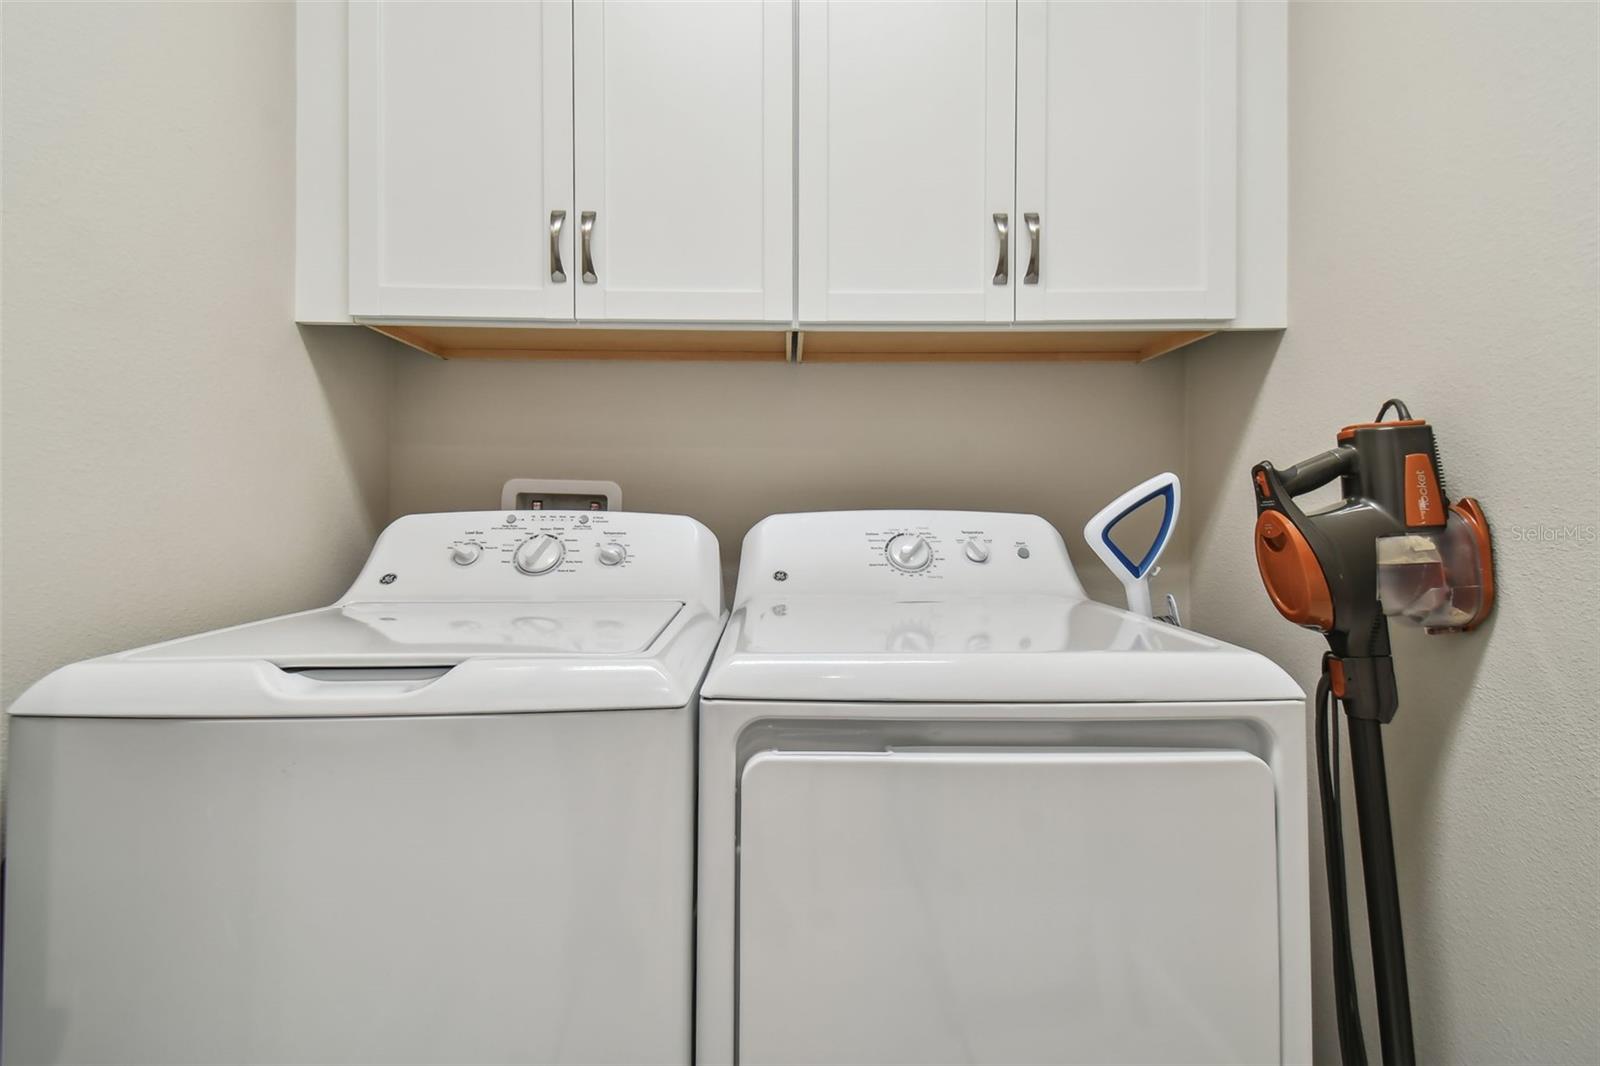 Laundry room with extra storage cabinets and gas dryer.